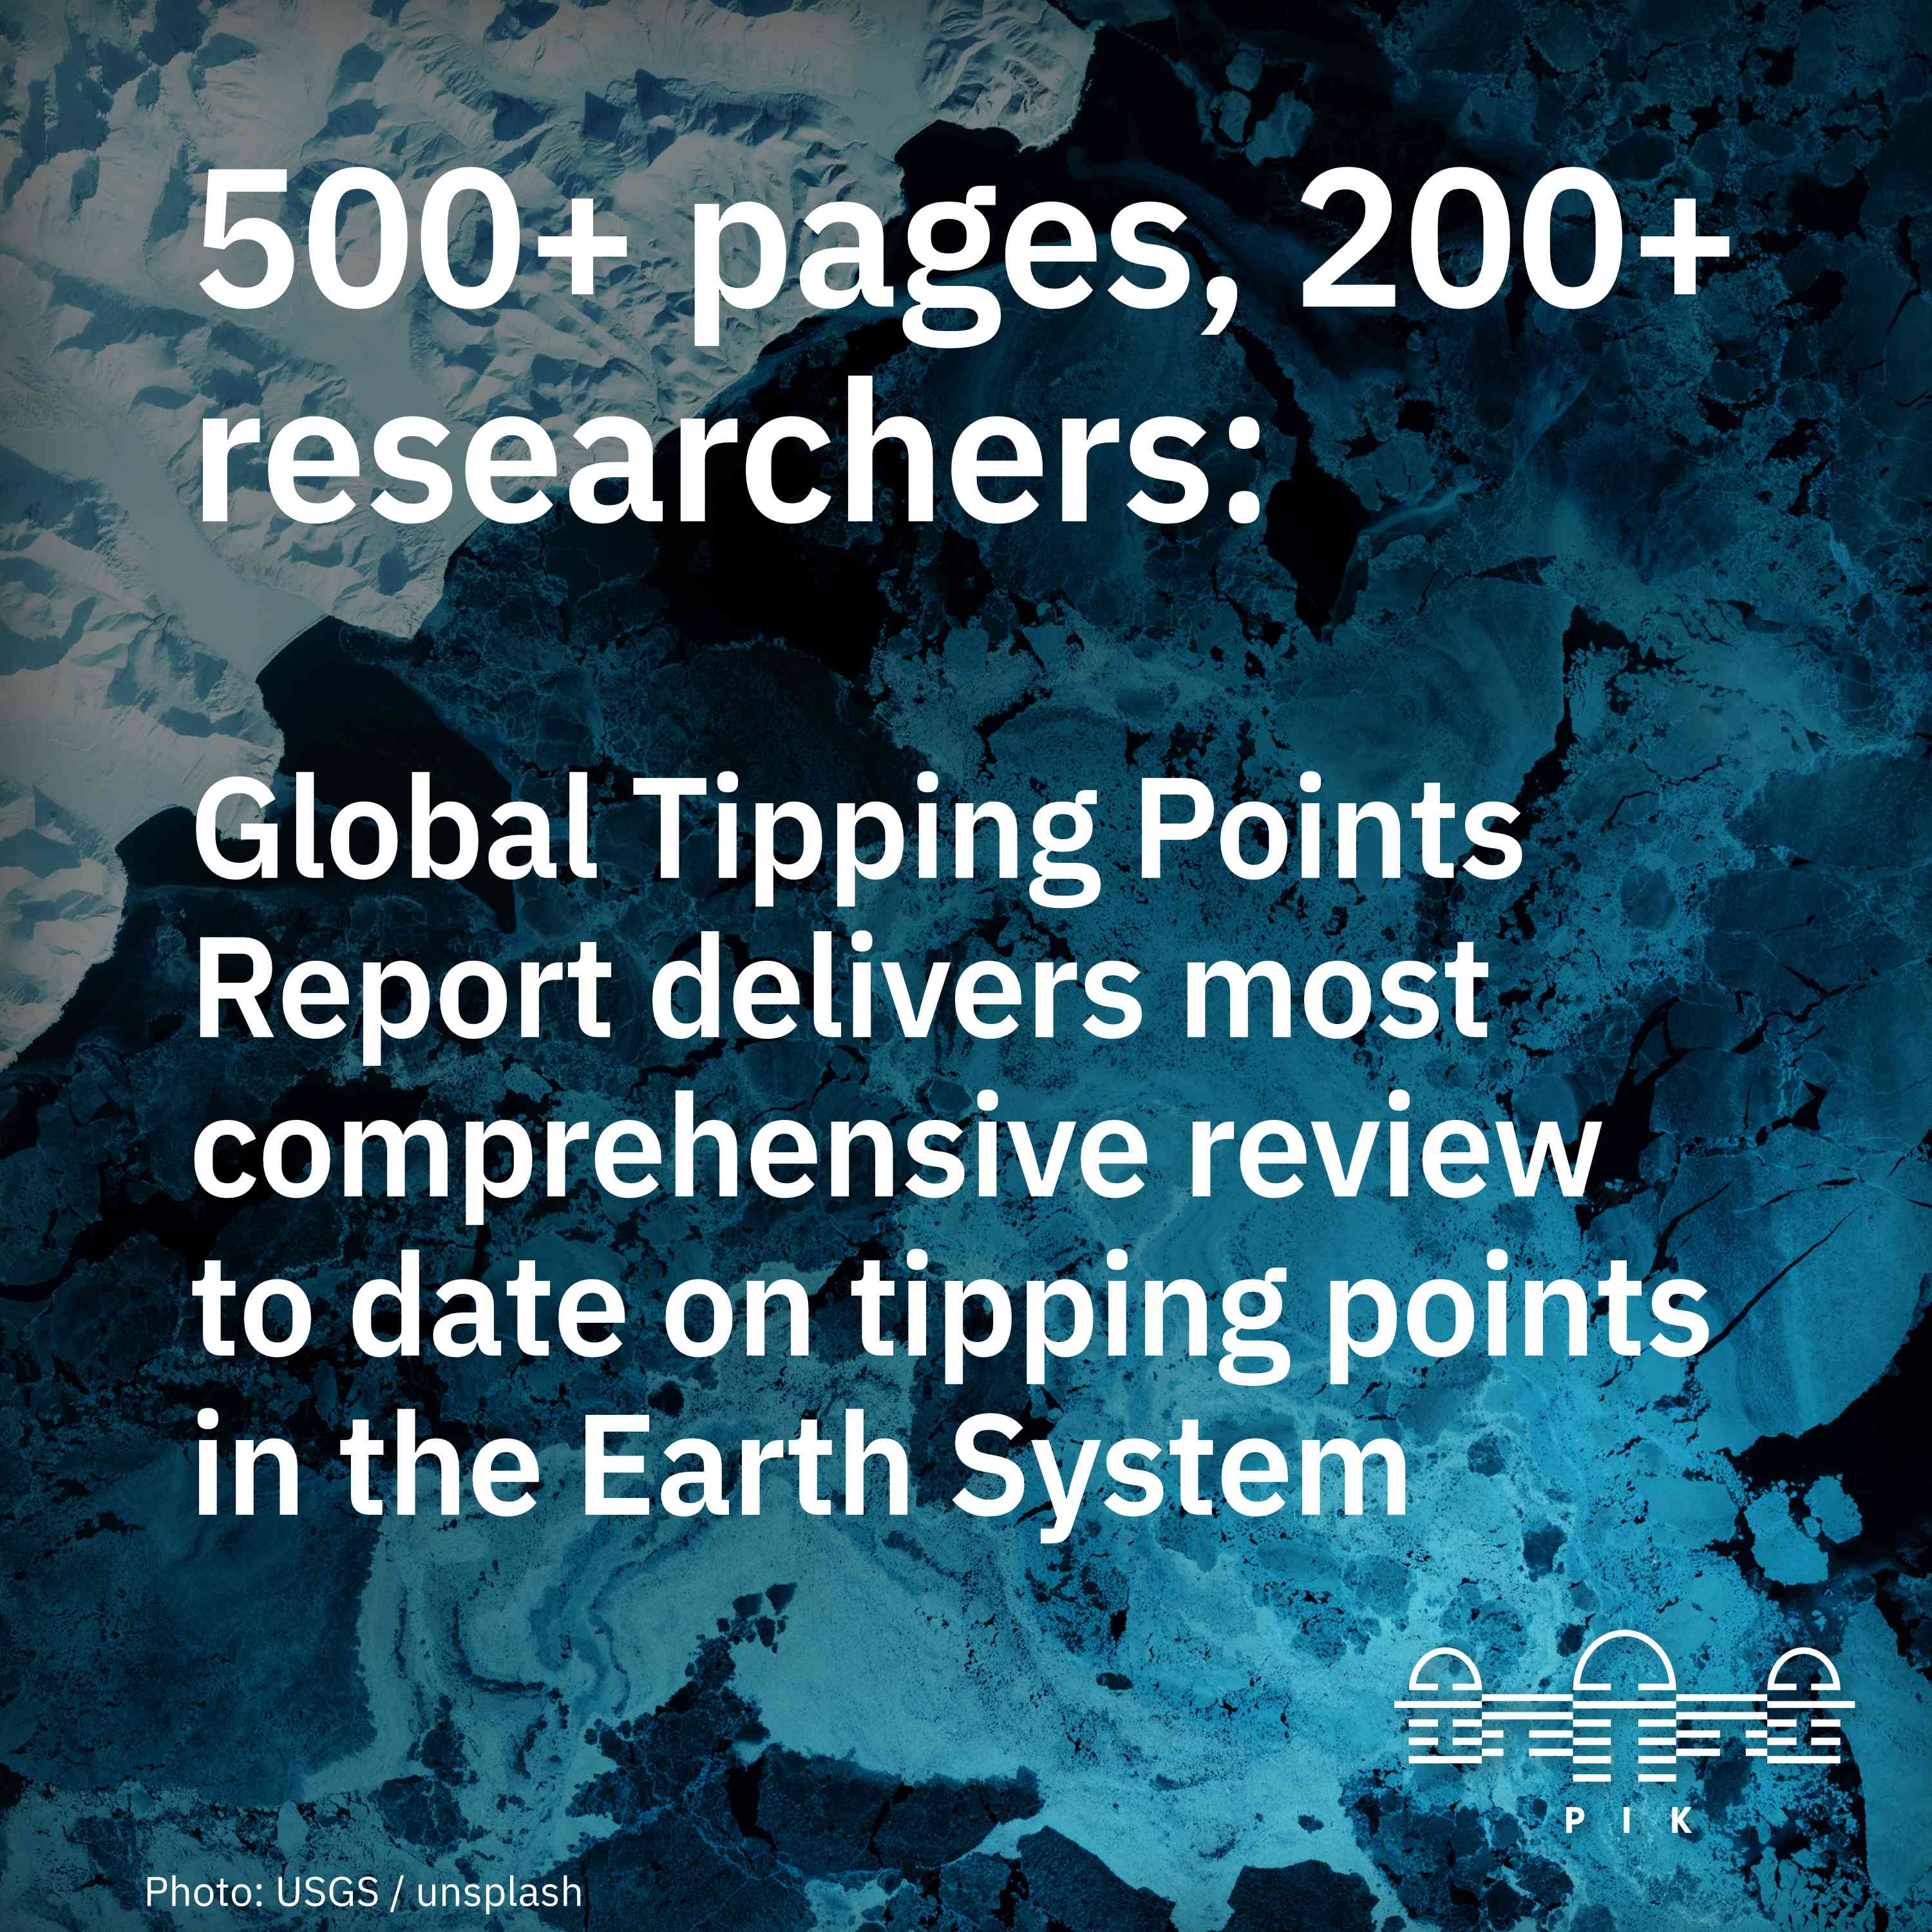 Global Tipping Points Report published